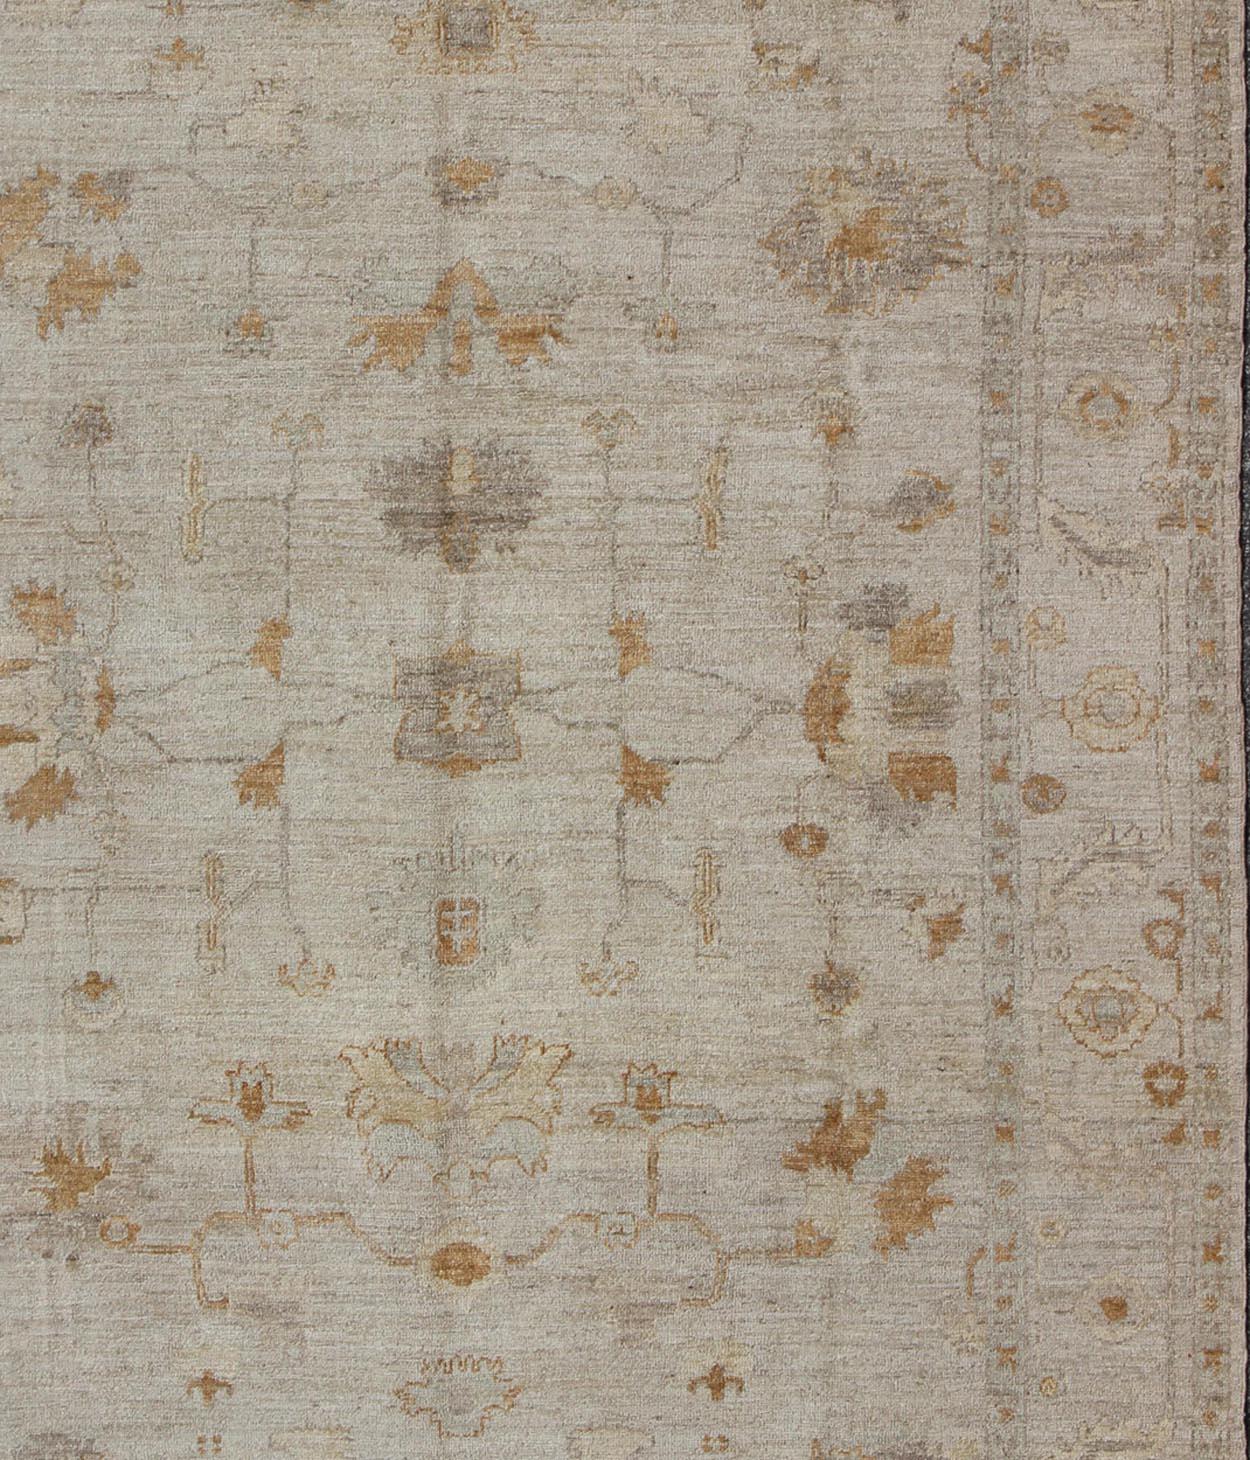 Angora Oushak Turkish Rug With Classic Oushak Design in Neutral Tones and Pop of Colors. Angora Oushak Turkish Rug With Classic Oushak Design in Neutral Tones and Pop of Colors.  Keivan Woven Arts/ rug AN-114747. Origin/ Turkey, Wool reproduction